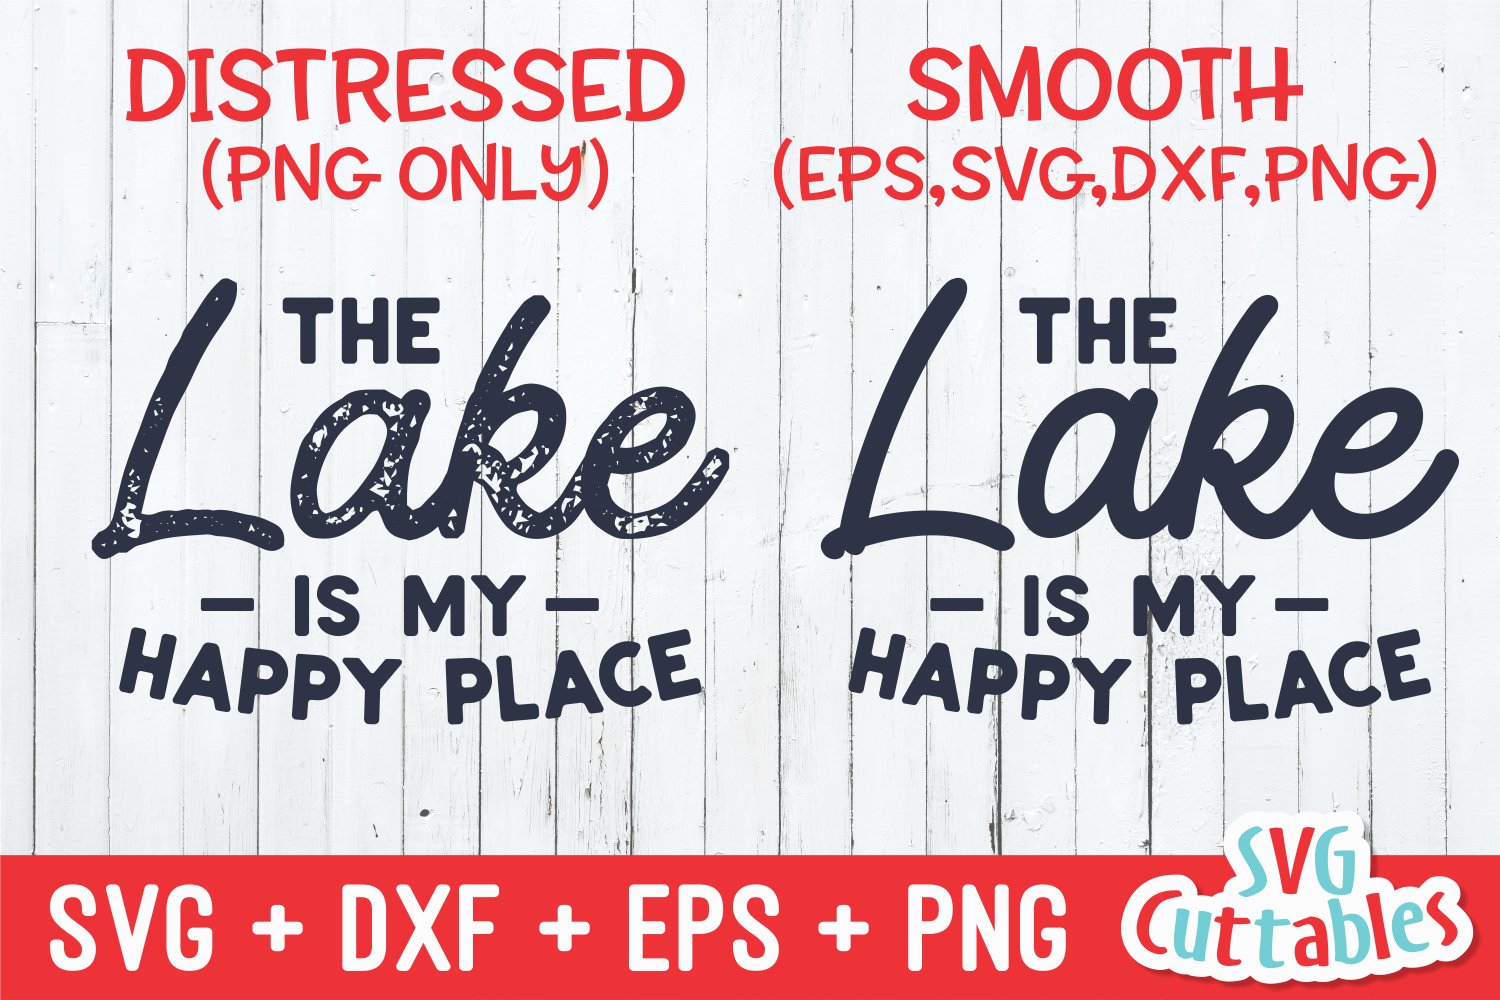 Distressed & smooth types of fonts.